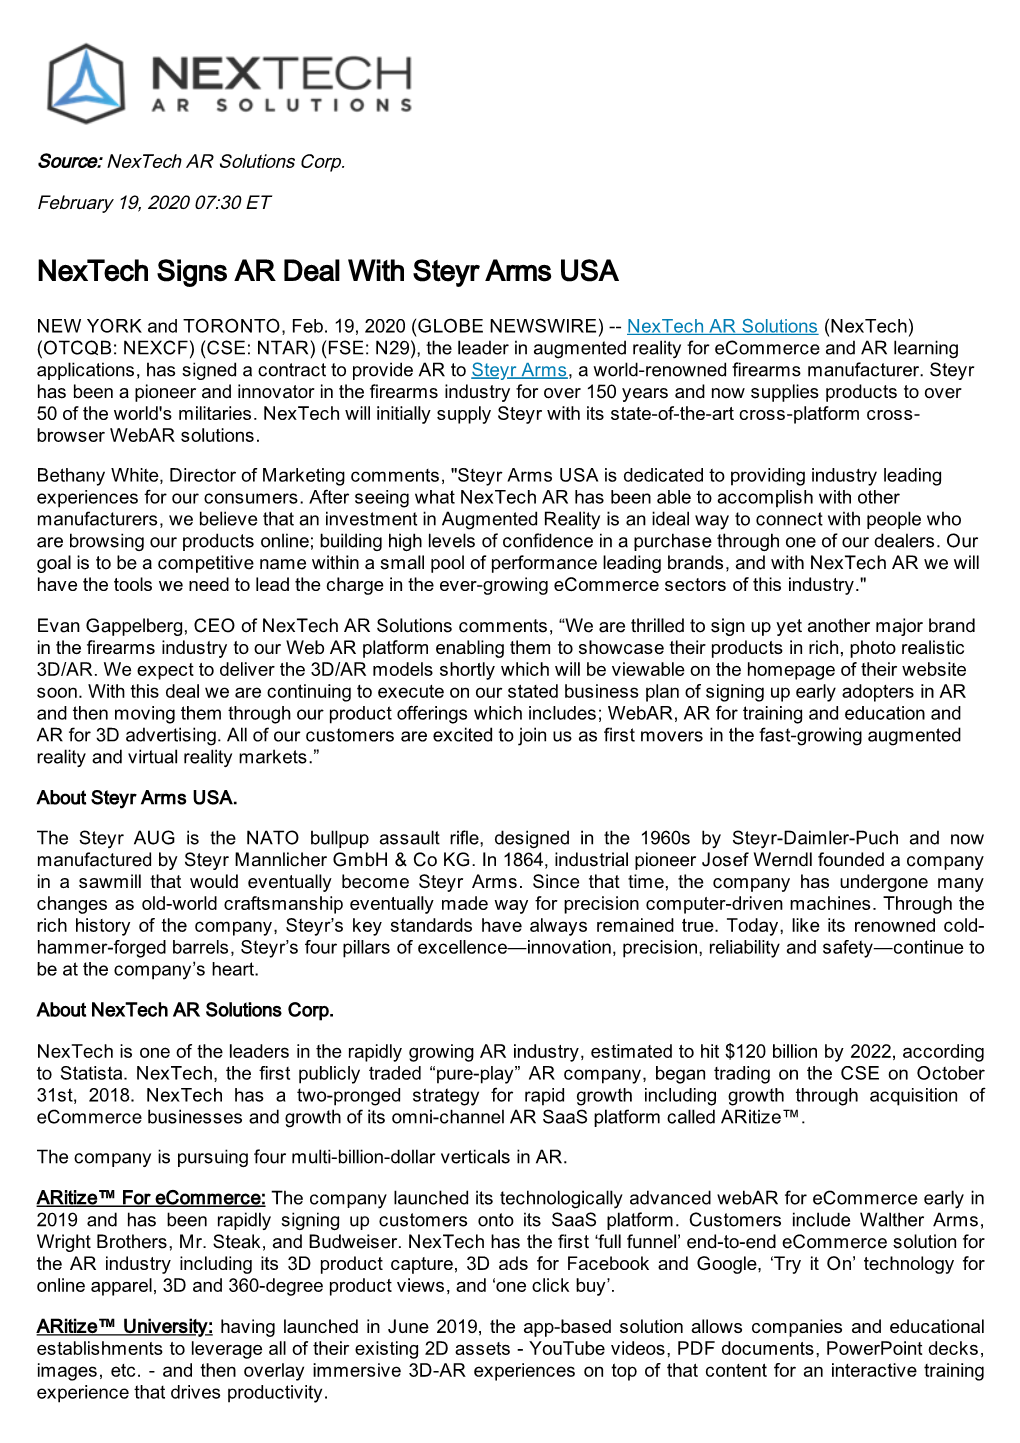 Nextech Signs AR Deal with Steyr Arms USA